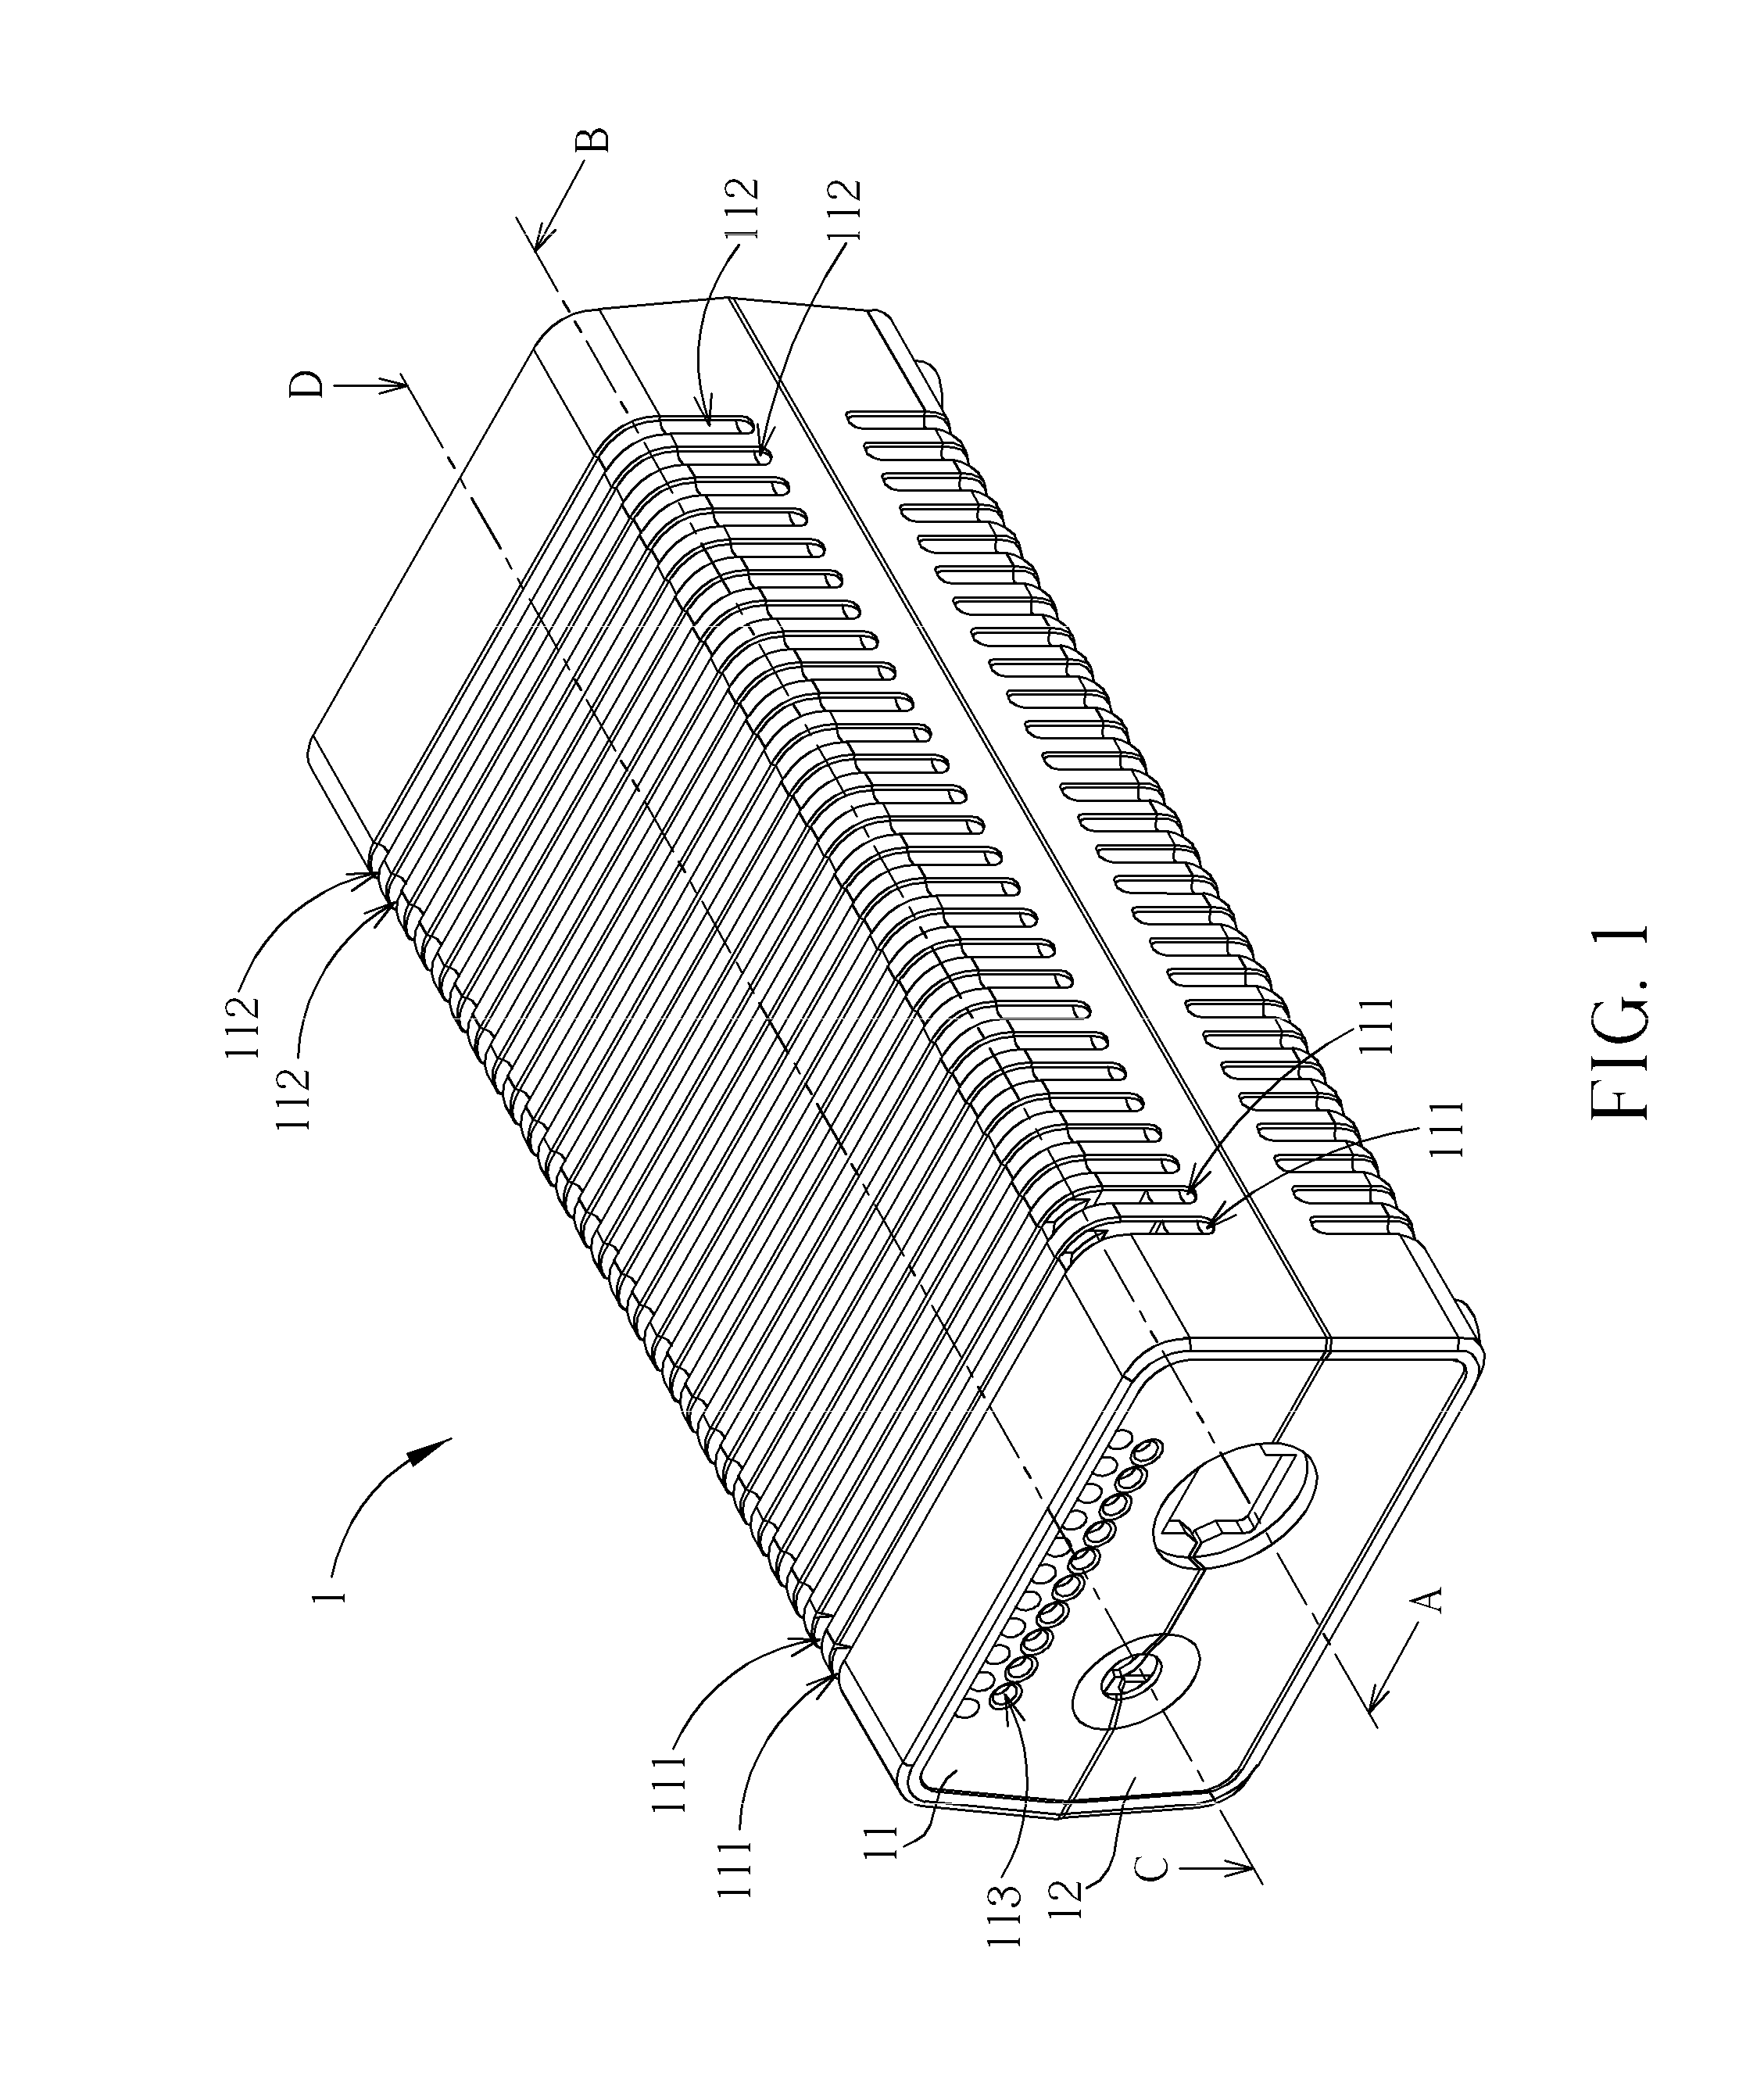 Waterproof and heat-dissipating module mounted for an electronic device